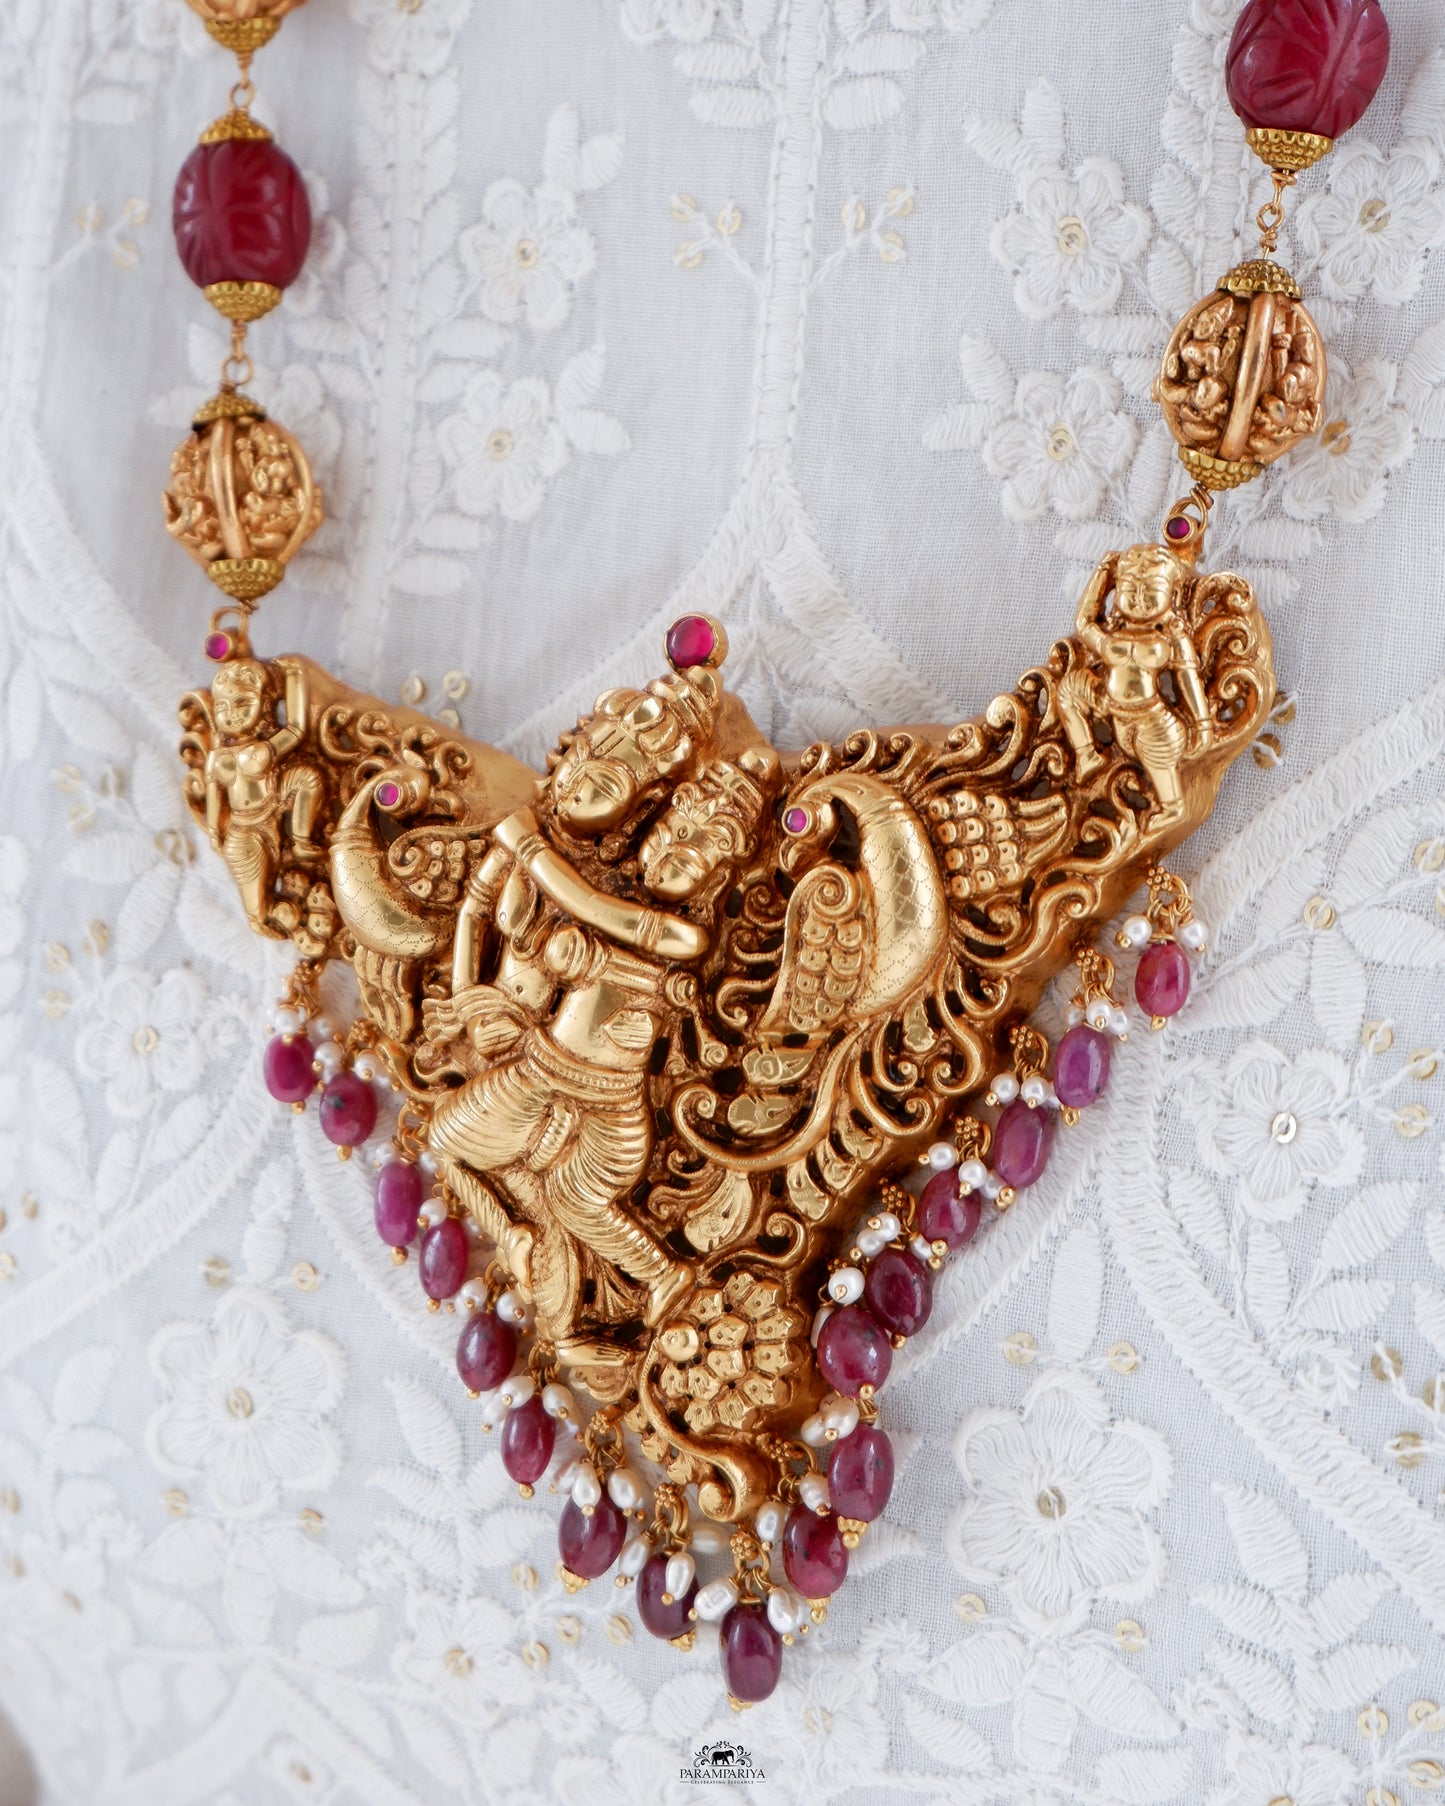 A captivating unisex necklace featuring Krishna Radha in pure silver and antique gold micron plating, this piece is part of our revered temple jewellery collection.